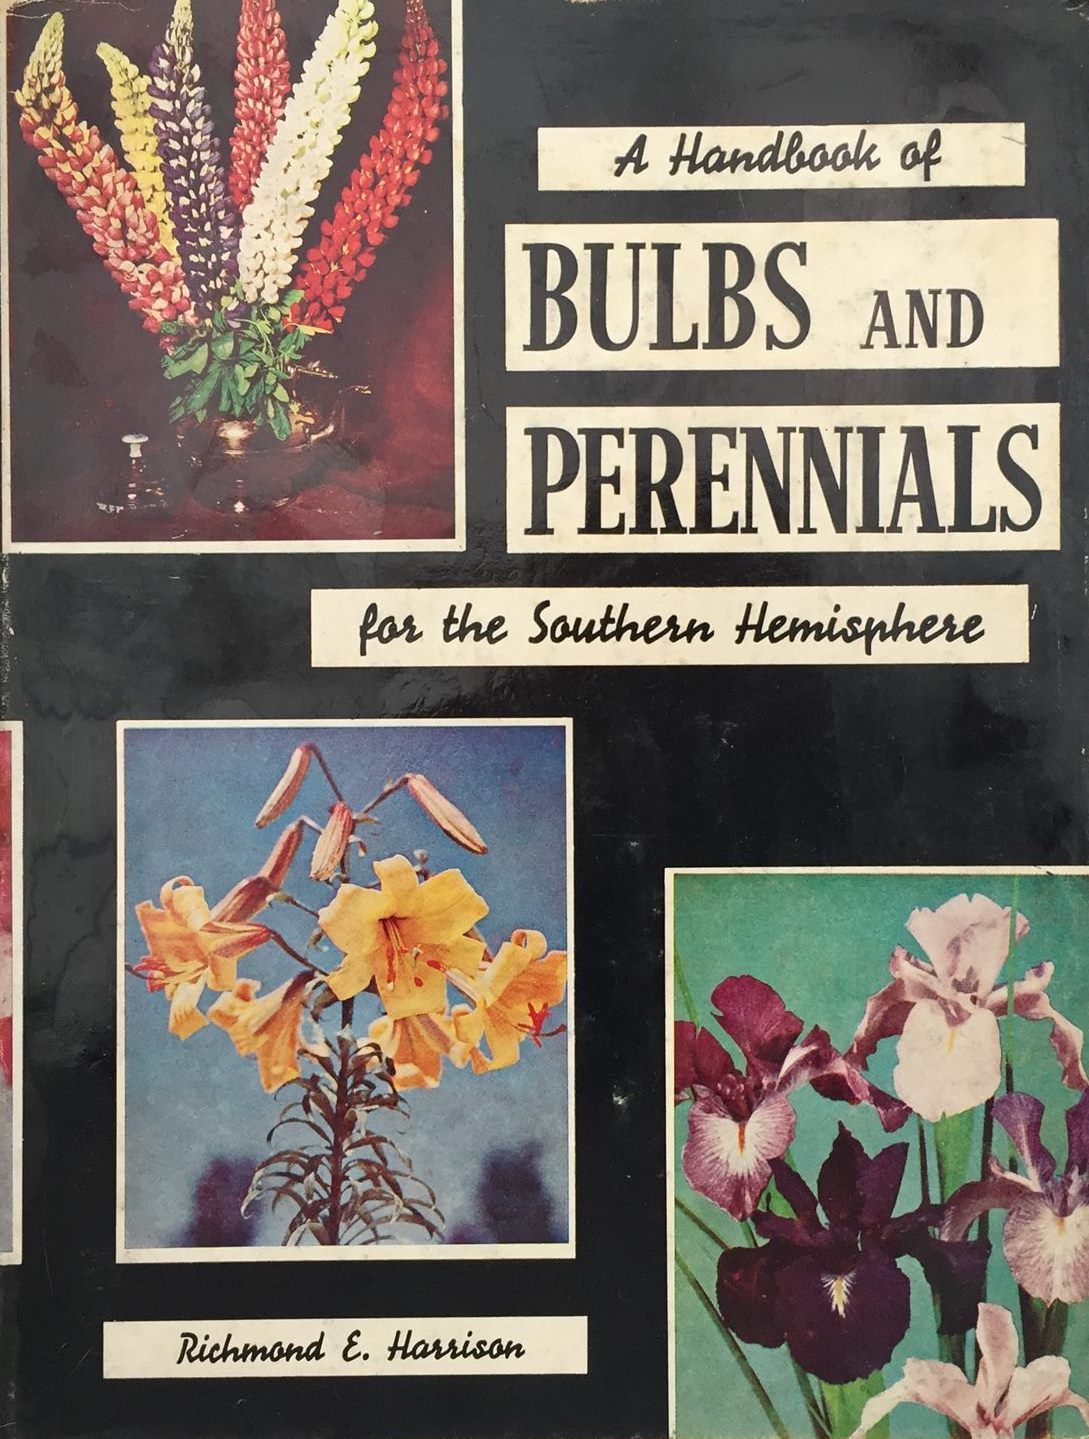 A Handbook of Bulbs and Perennials for the Southern Hemisphere